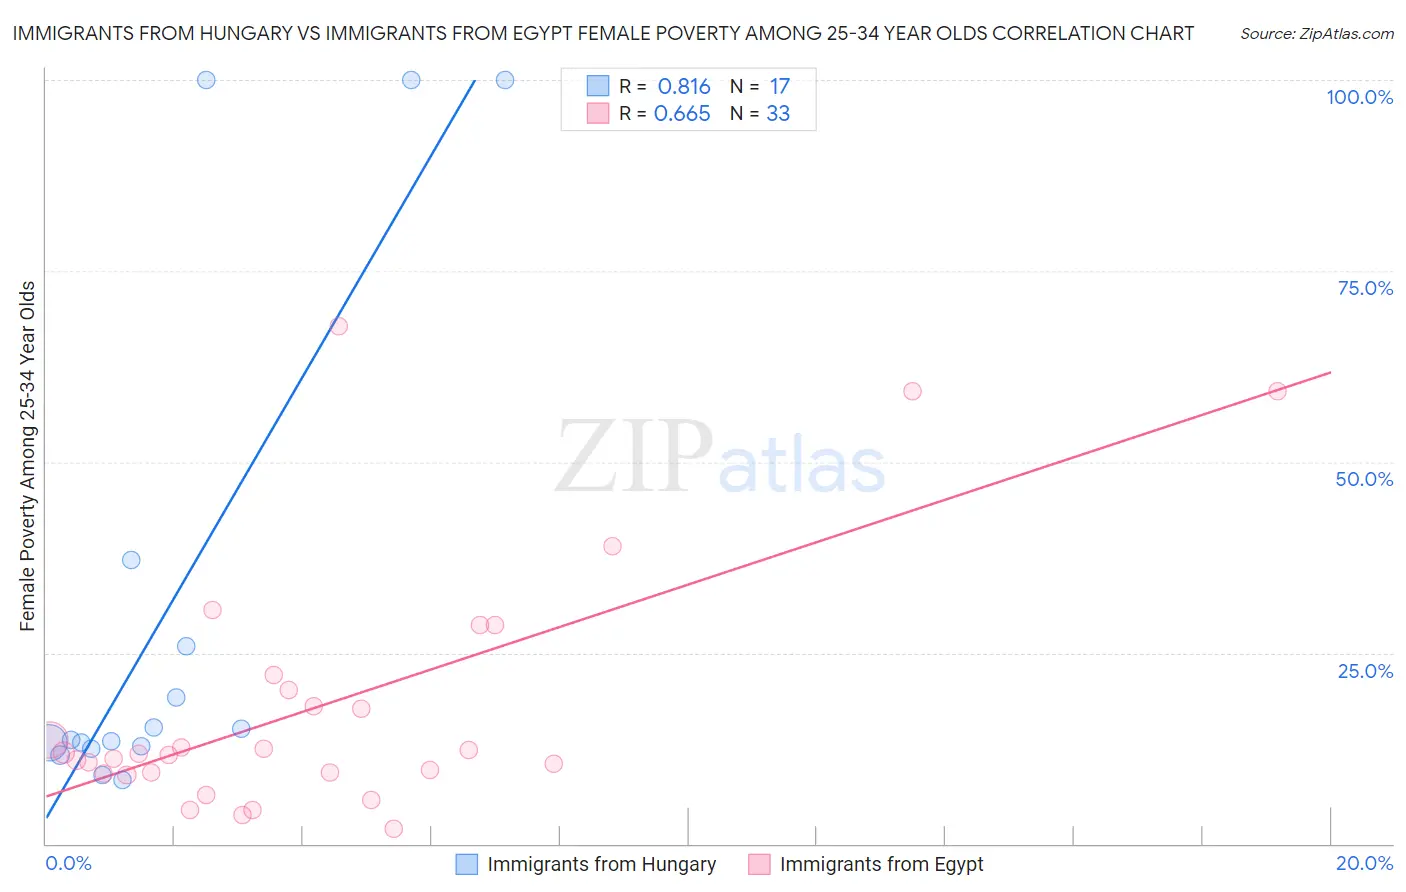 Immigrants from Hungary vs Immigrants from Egypt Female Poverty Among 25-34 Year Olds